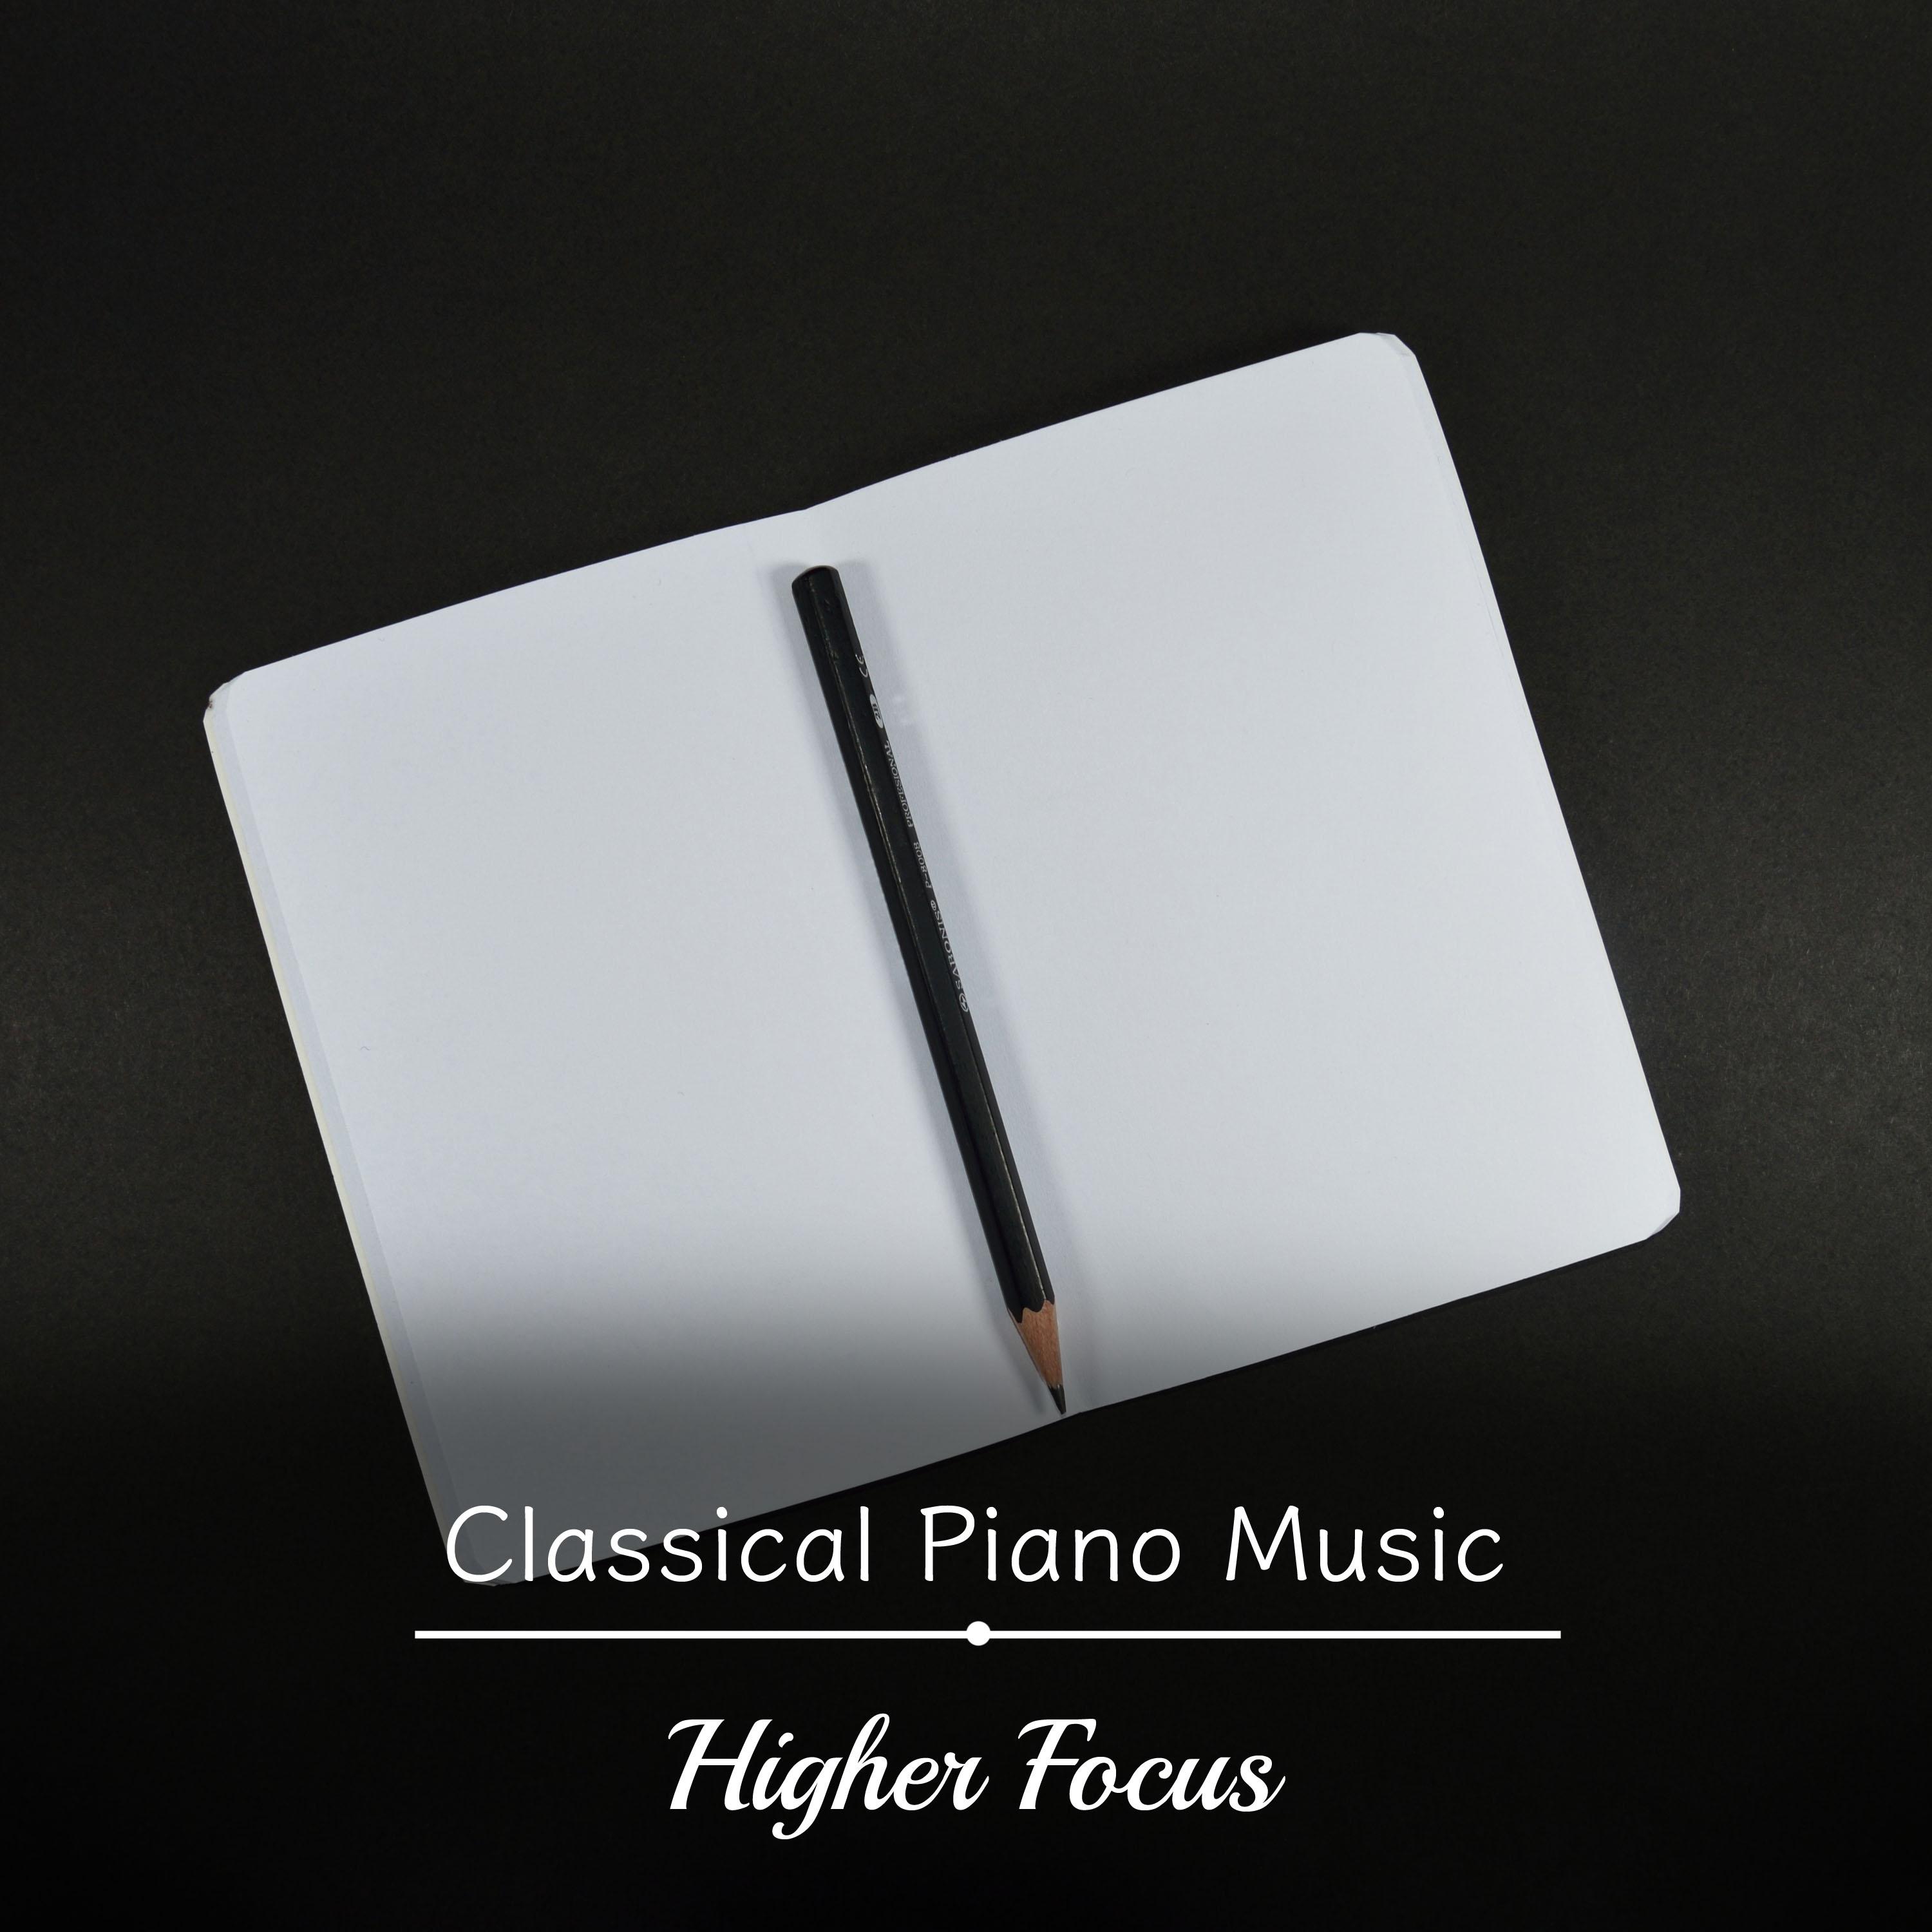 11 Classical Piano Music for Higher Focus